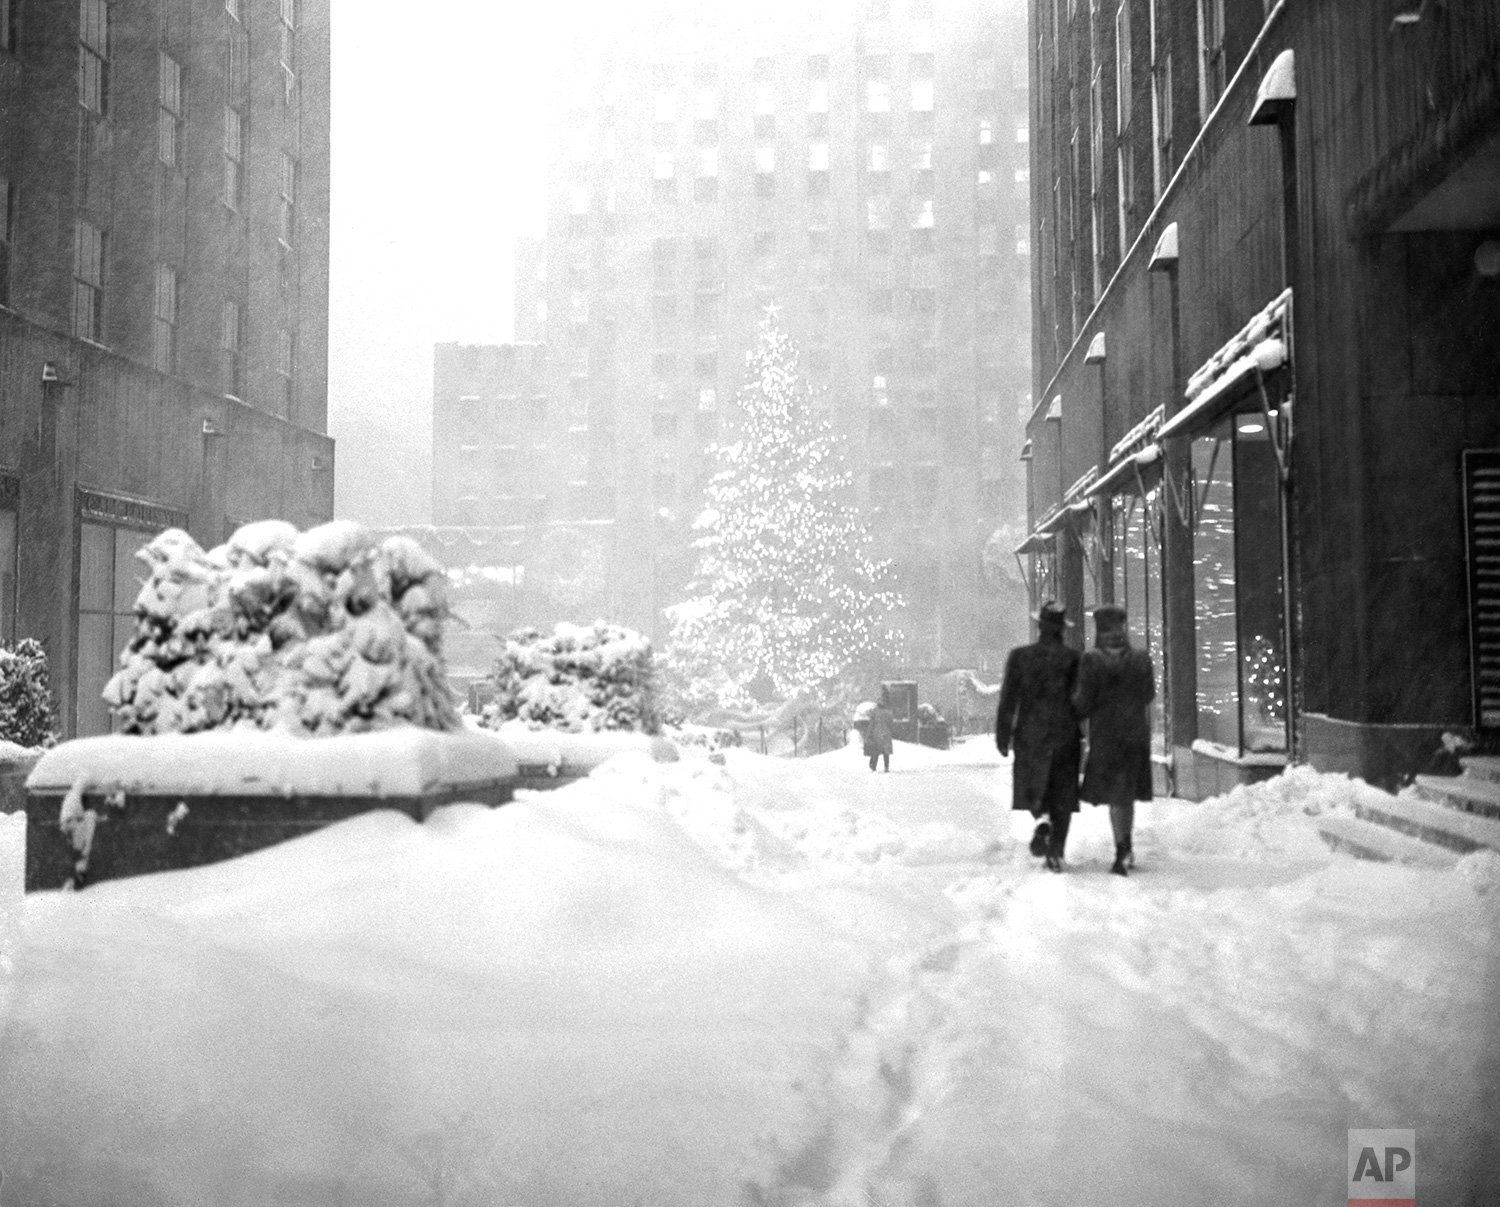  The landmark Christmas tree at New York's Rockefeller Plaza stands out Dec. 26, 1947 as a few hardy pedestrians make their way through the snow drifts of one of the heaviest winter storms in years. (AP Photo/Harry Harris) 